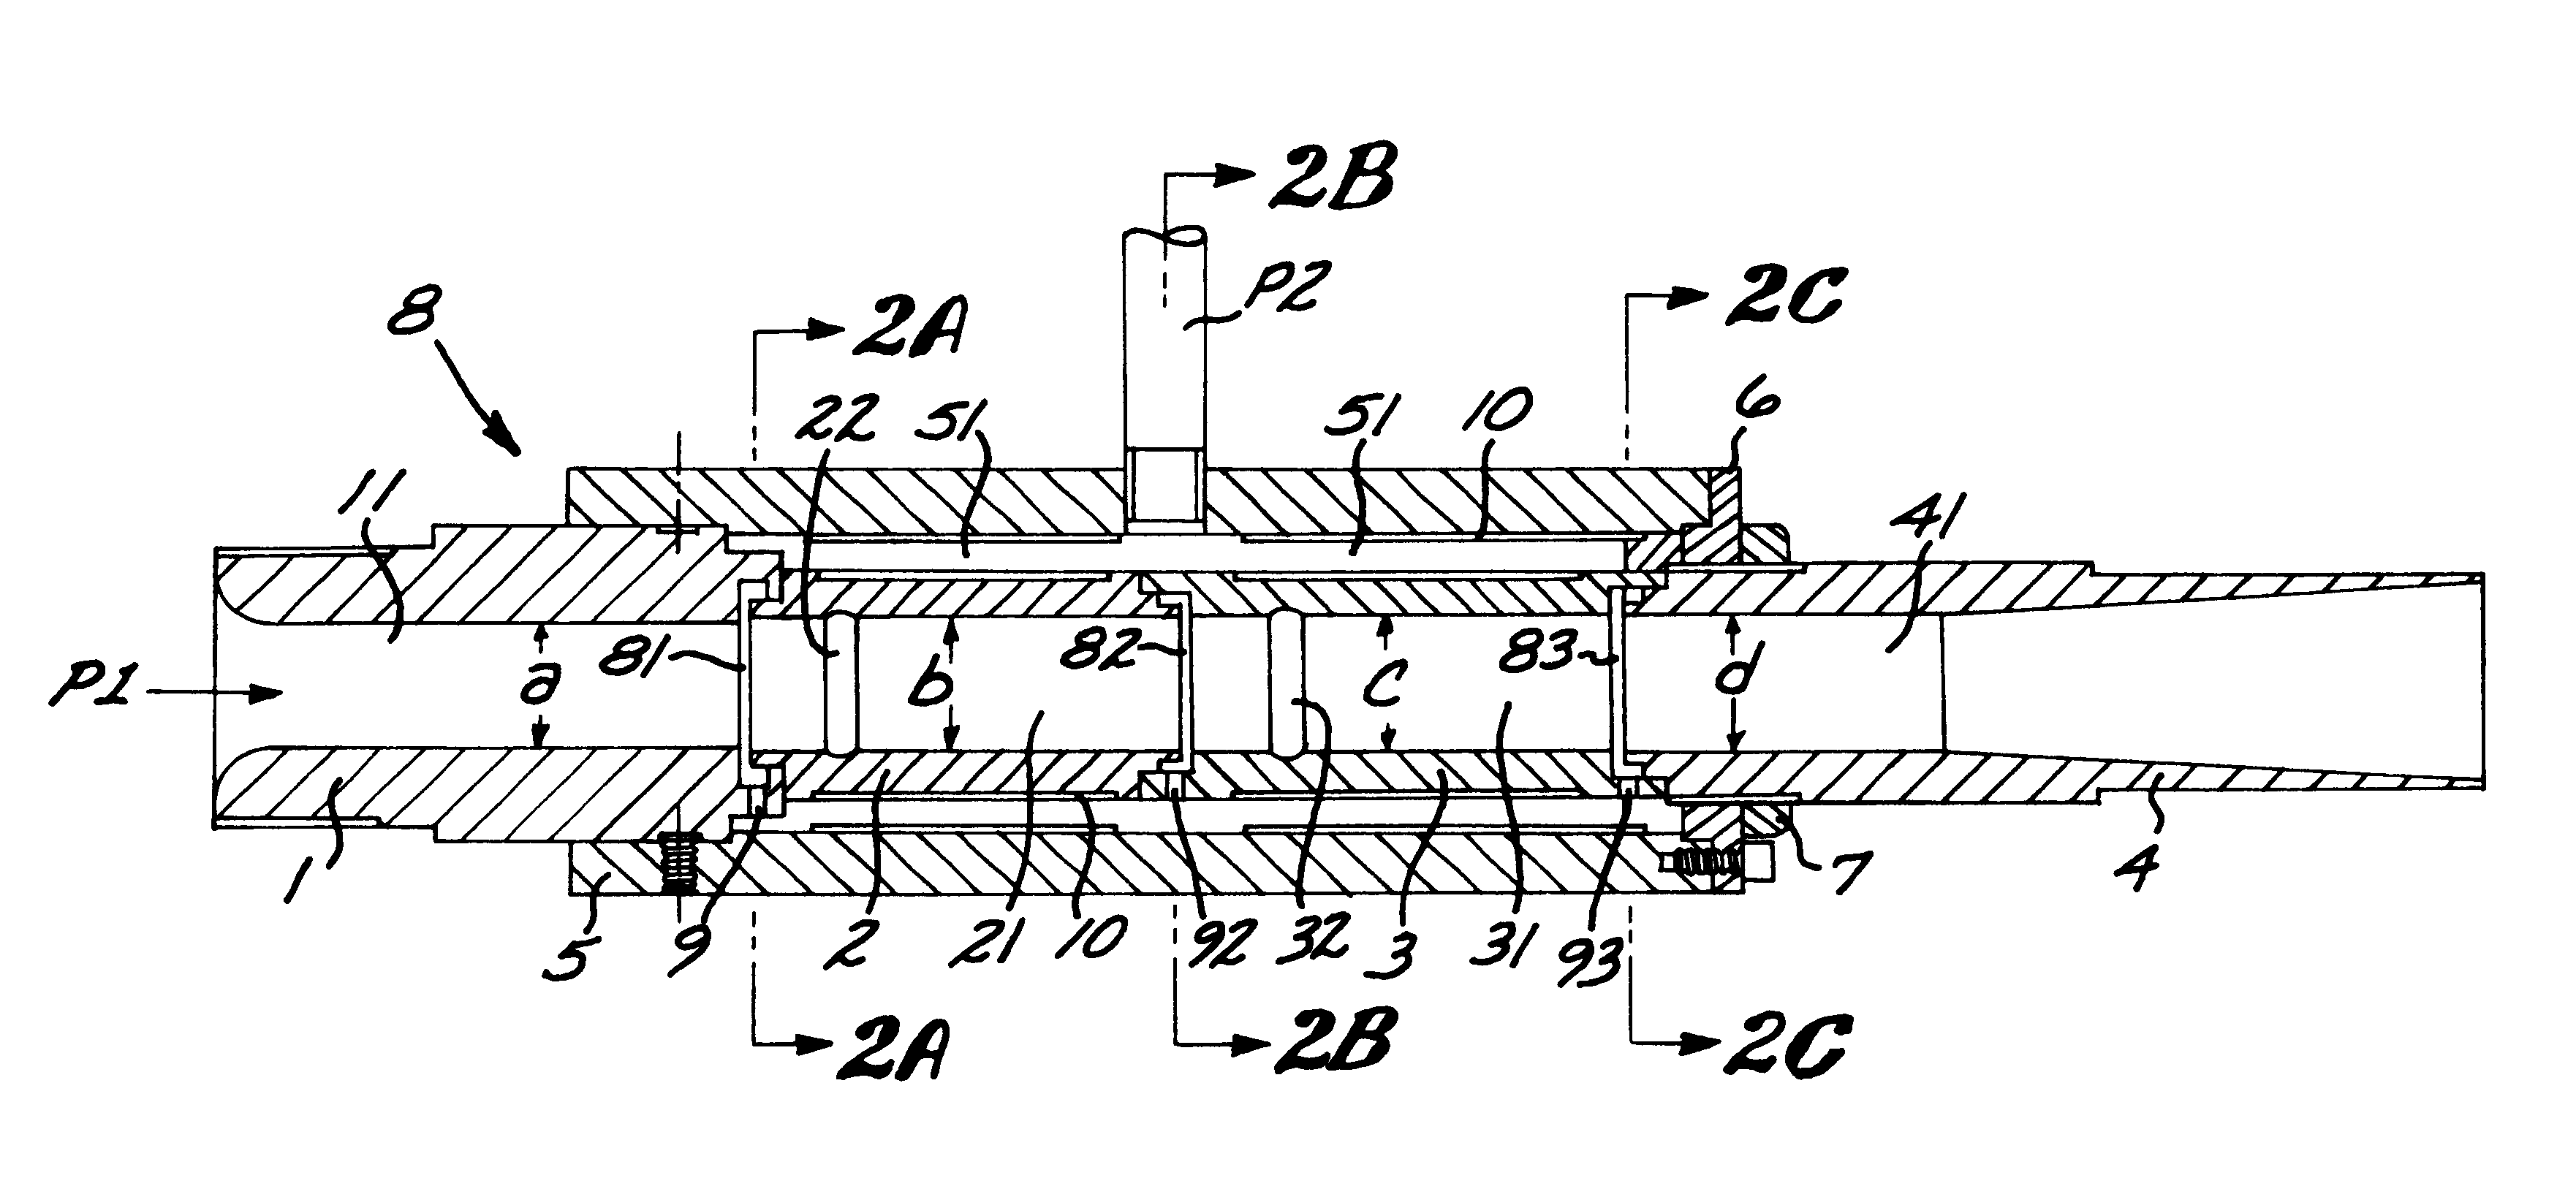 Aerating apparatus with far infrared radiation